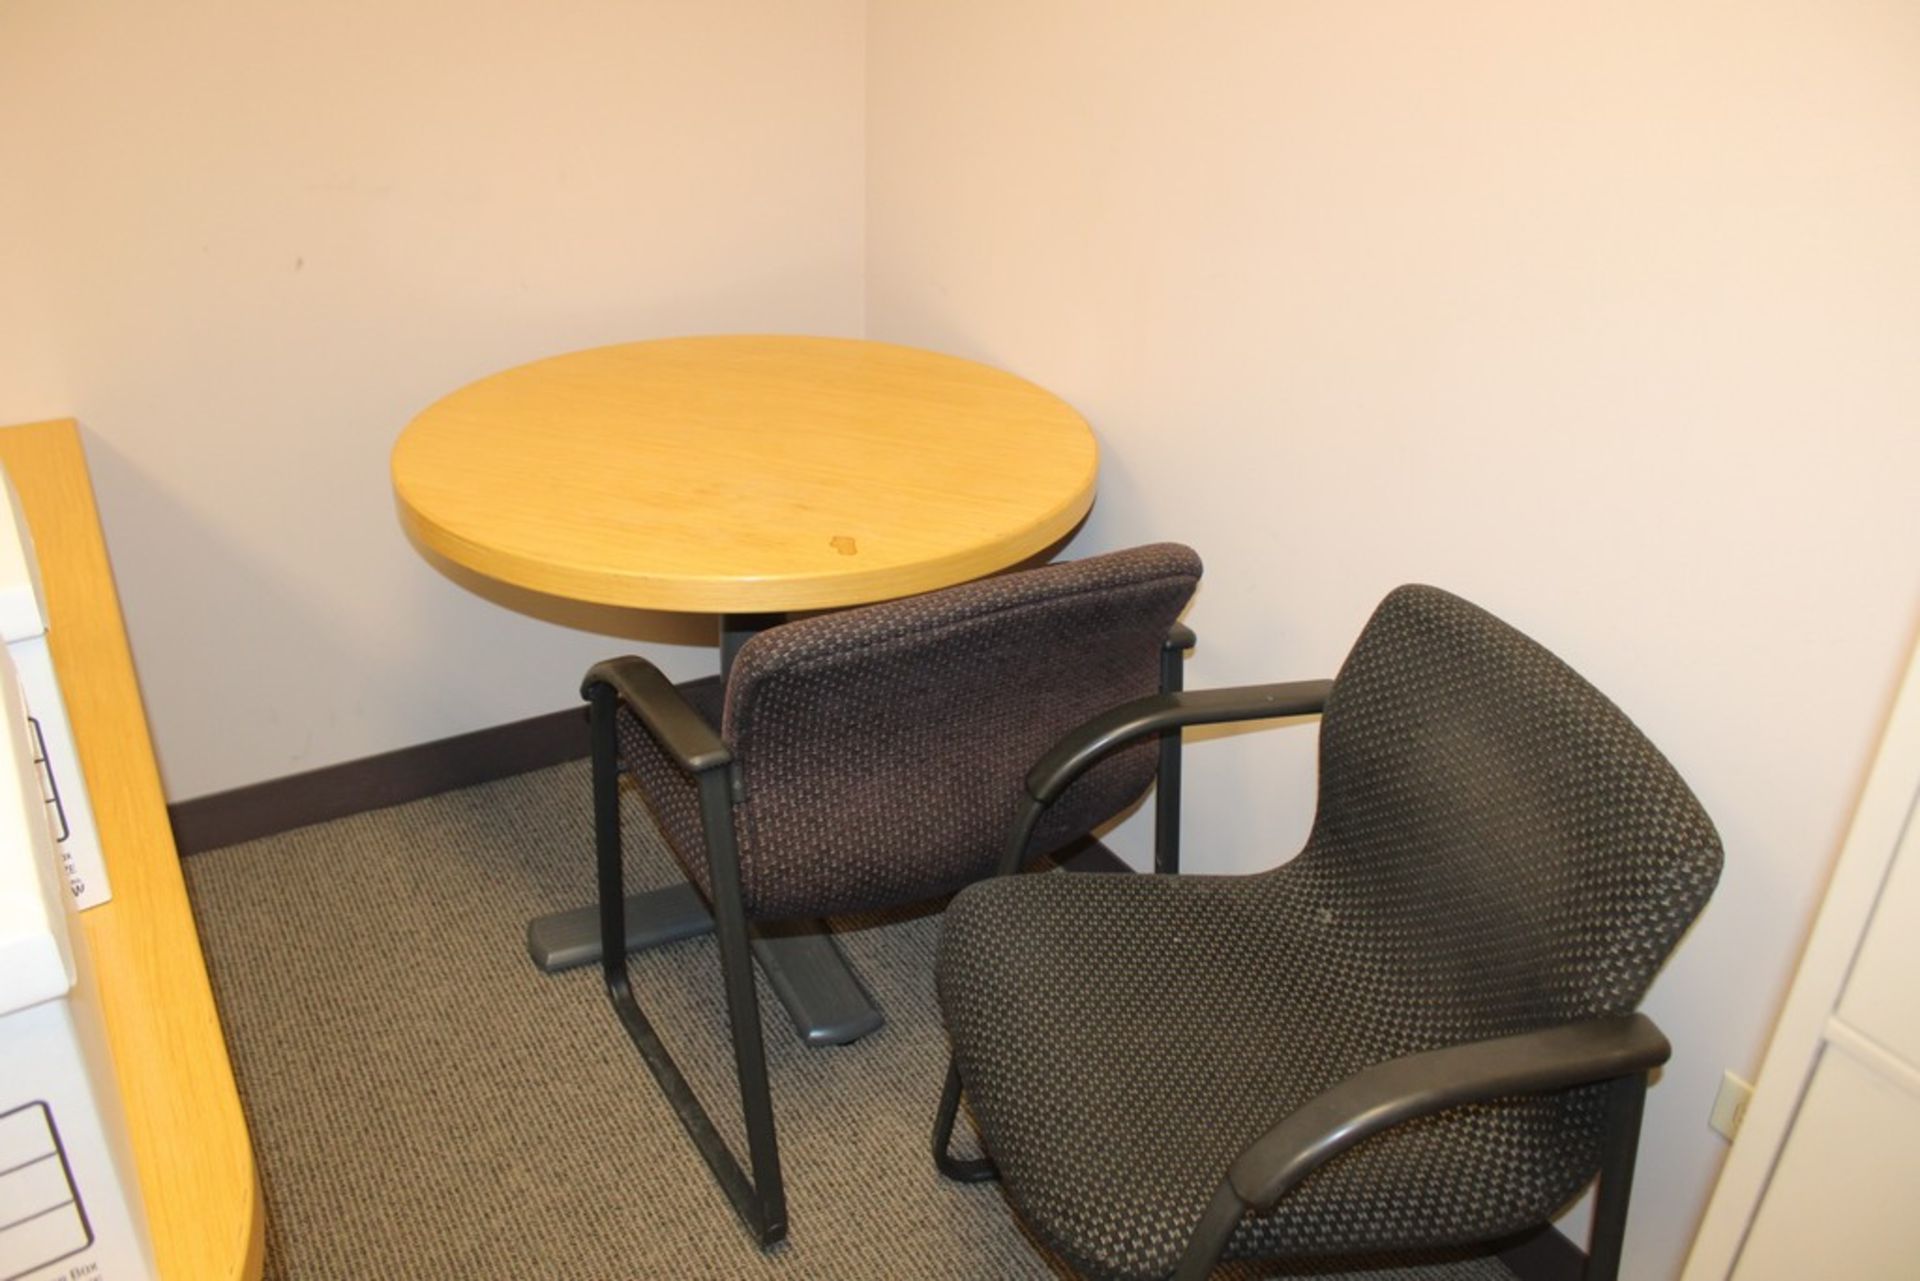 OFFICE FURNITURE, U-SHAPED DESK, 75" X 100" FOOTPRINT, WITH (2) TWO DRAWER LATERAL FILE CABINETS AND - Image 2 of 4